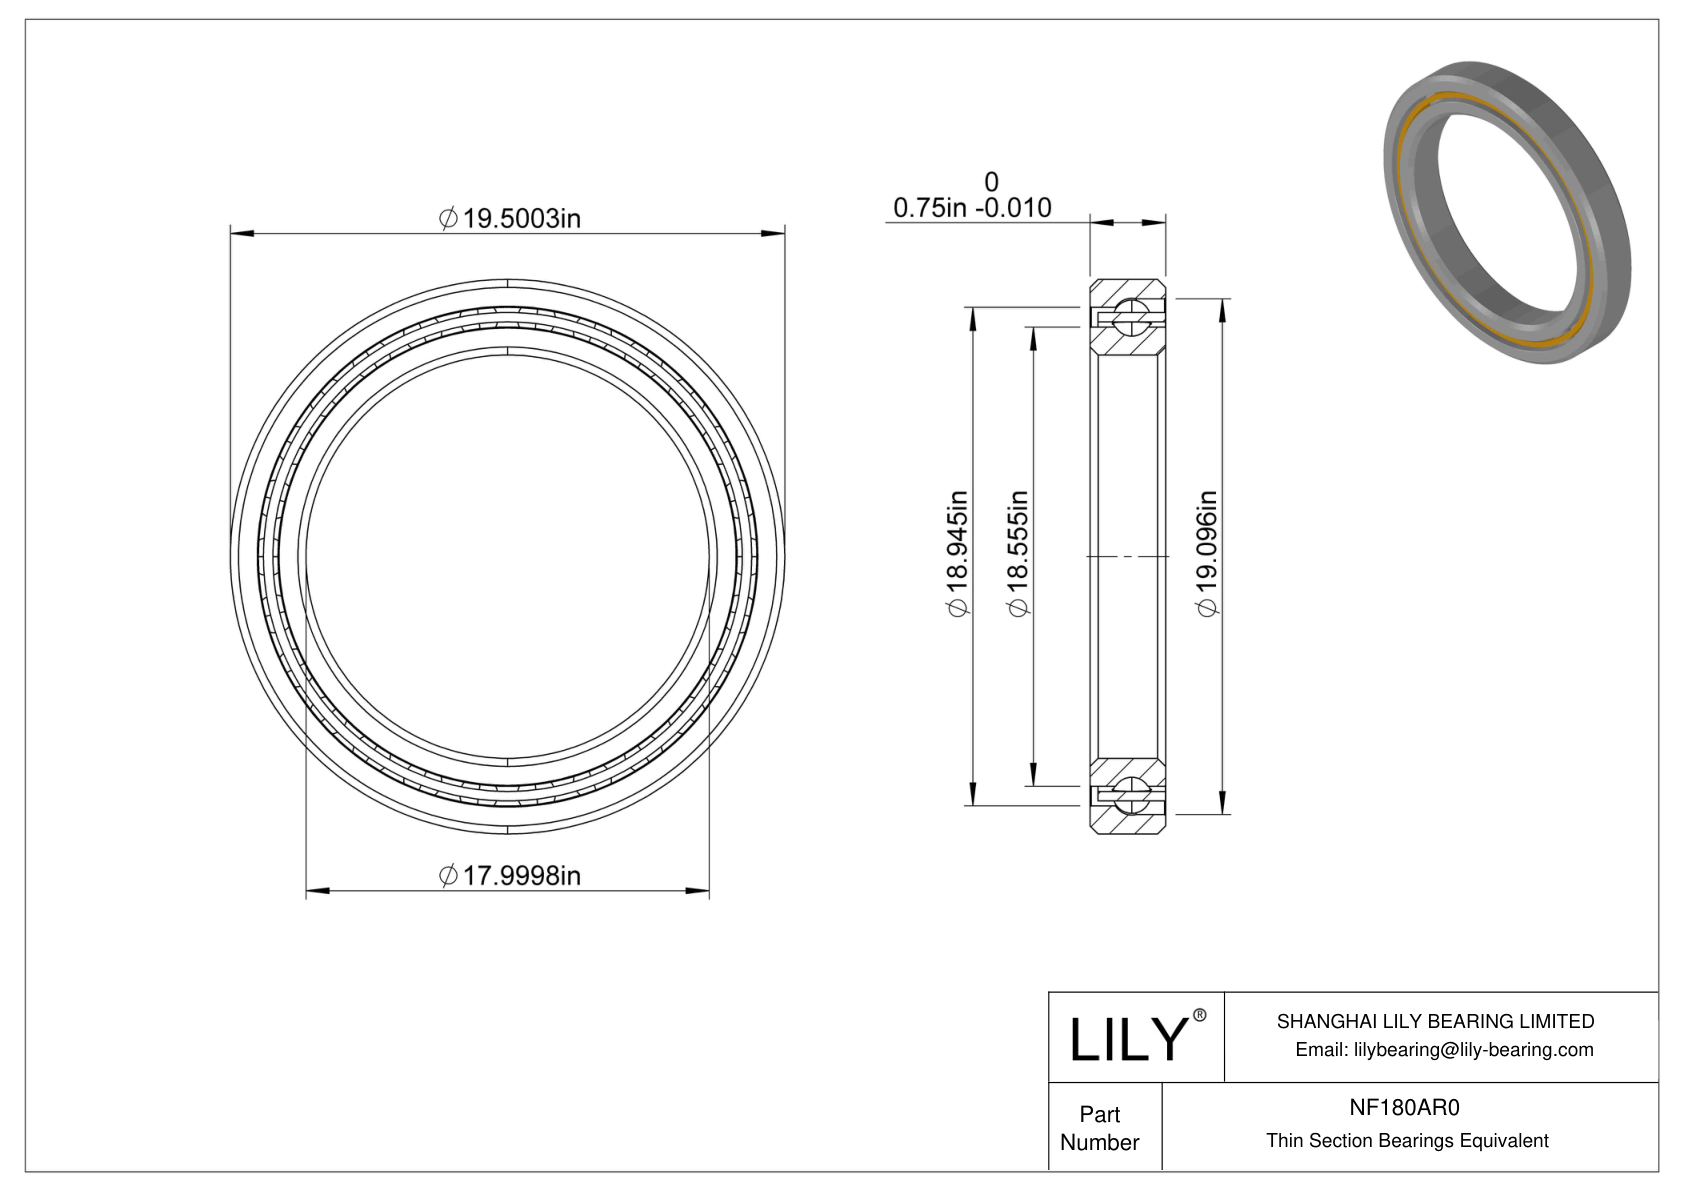 NF180AR0 Constant Section (CS) Bearings cad drawing